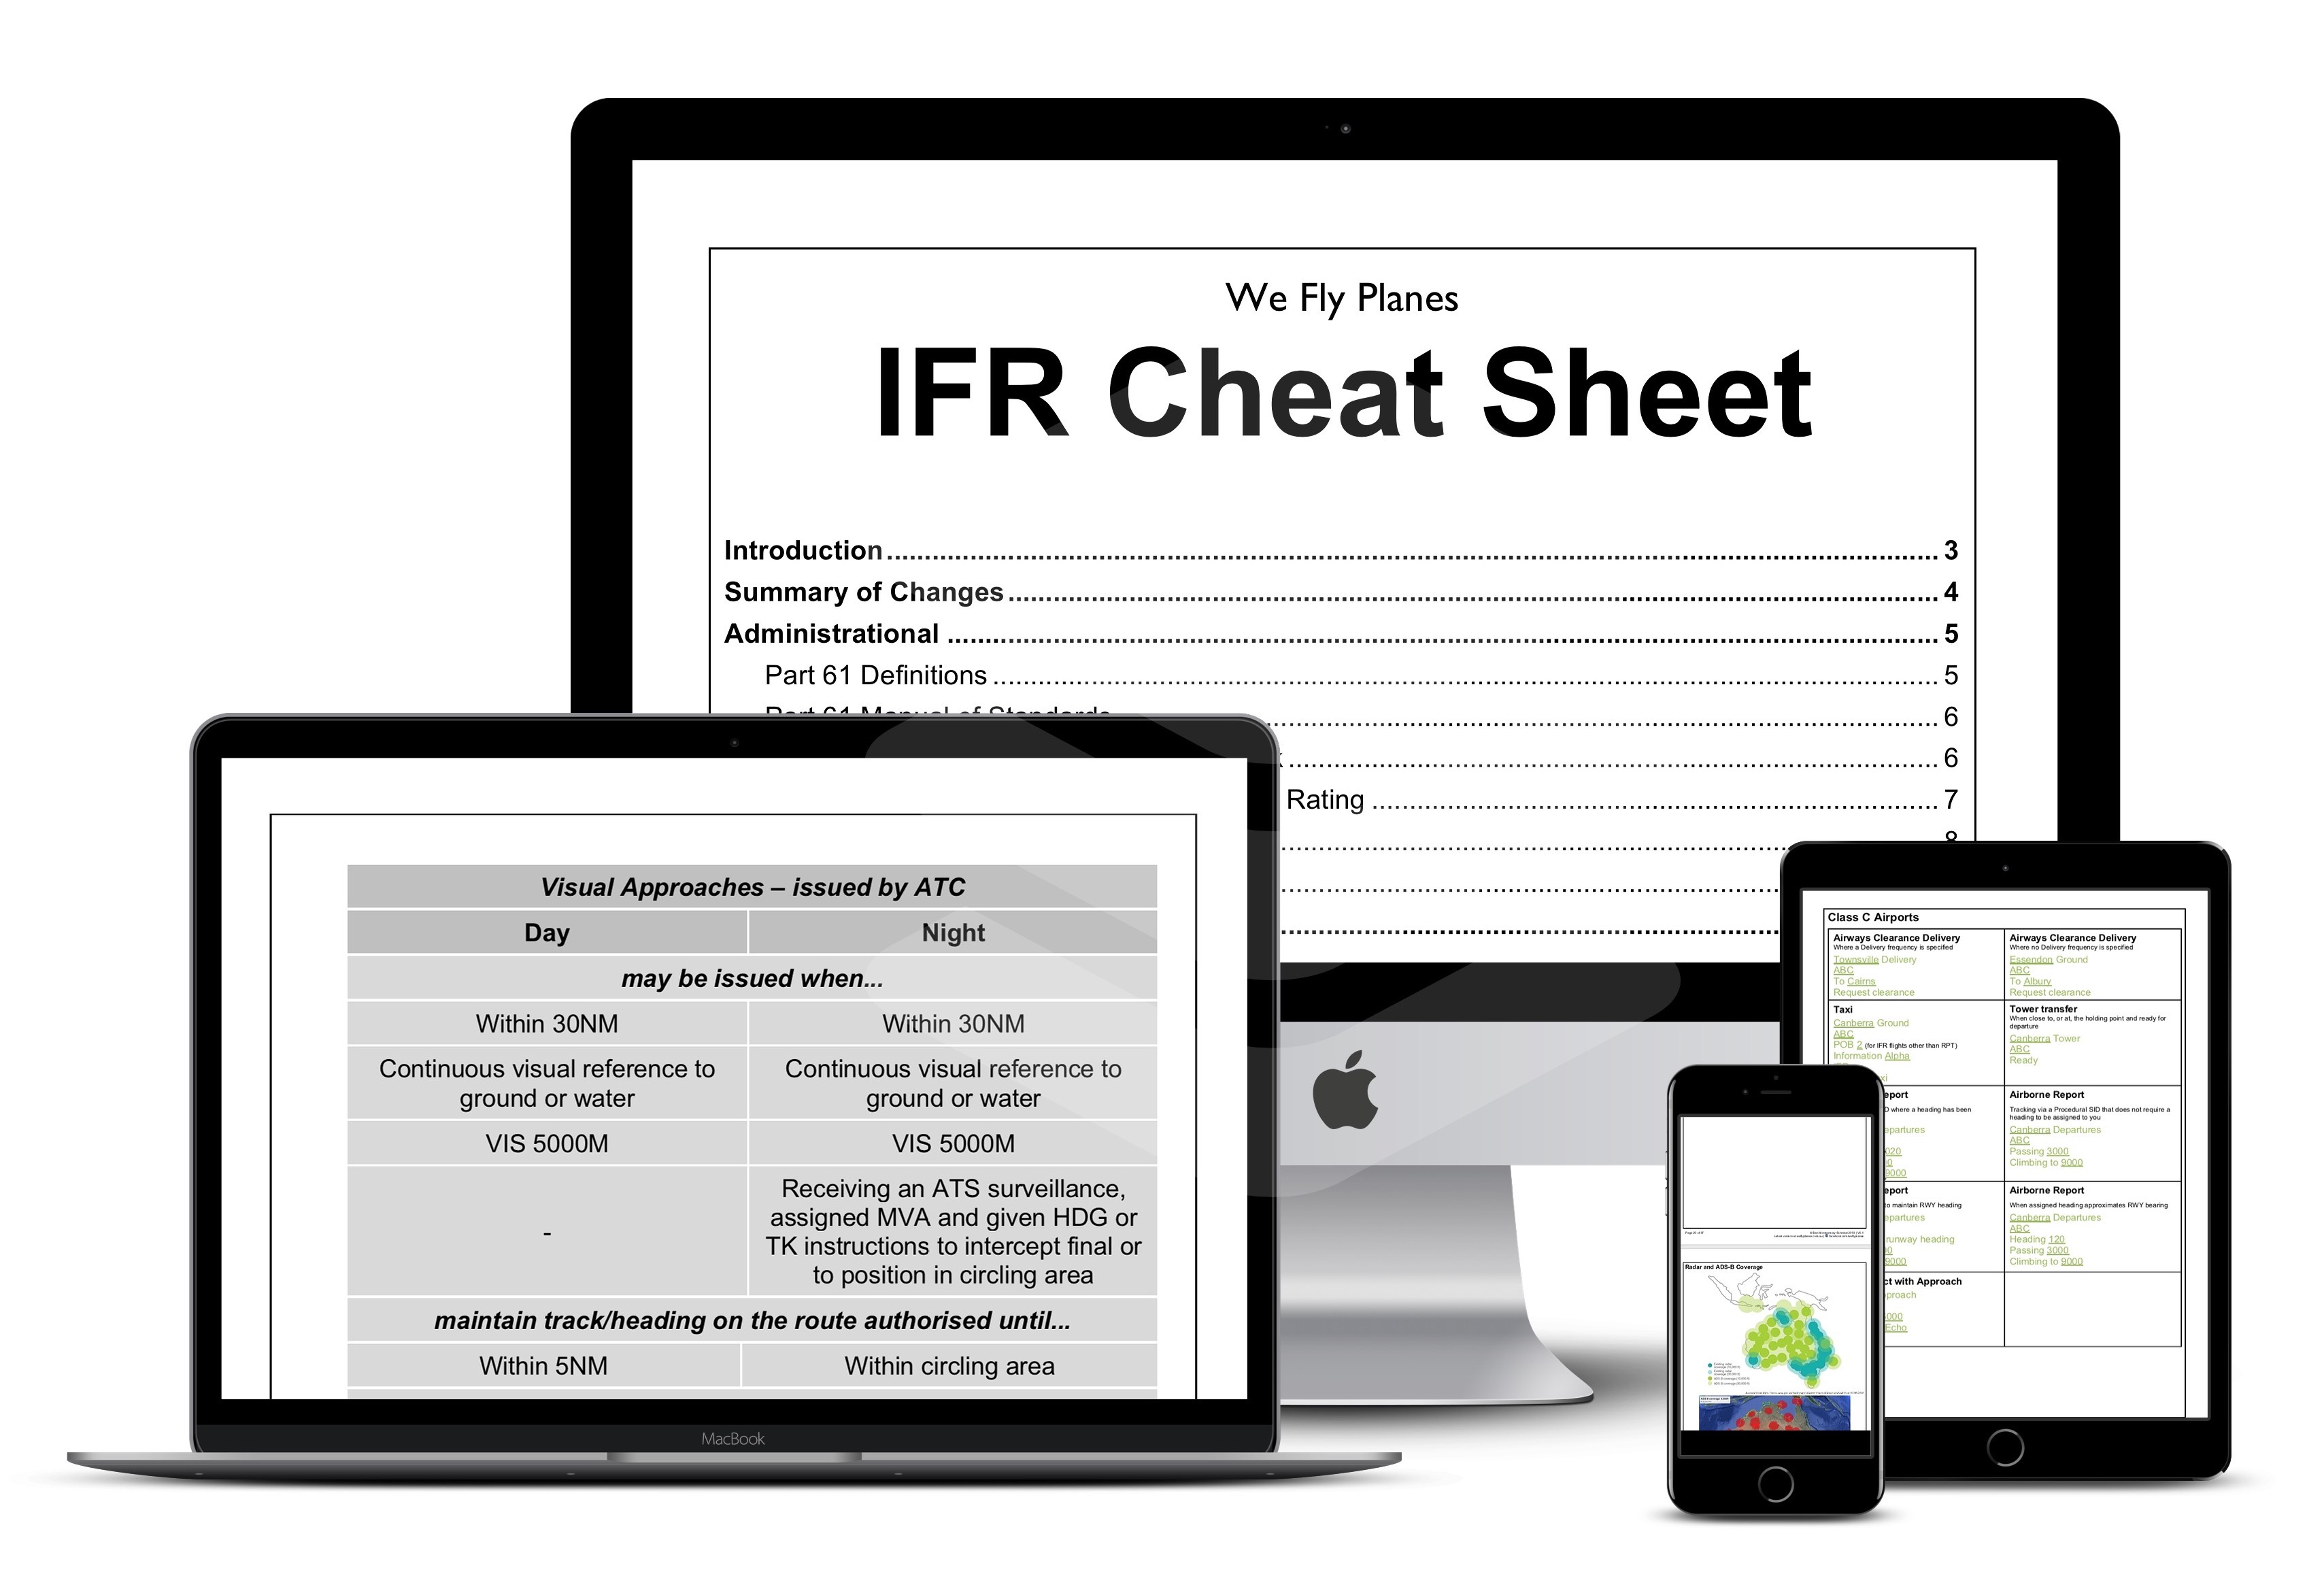 What is the IFR Cheat Sheet?